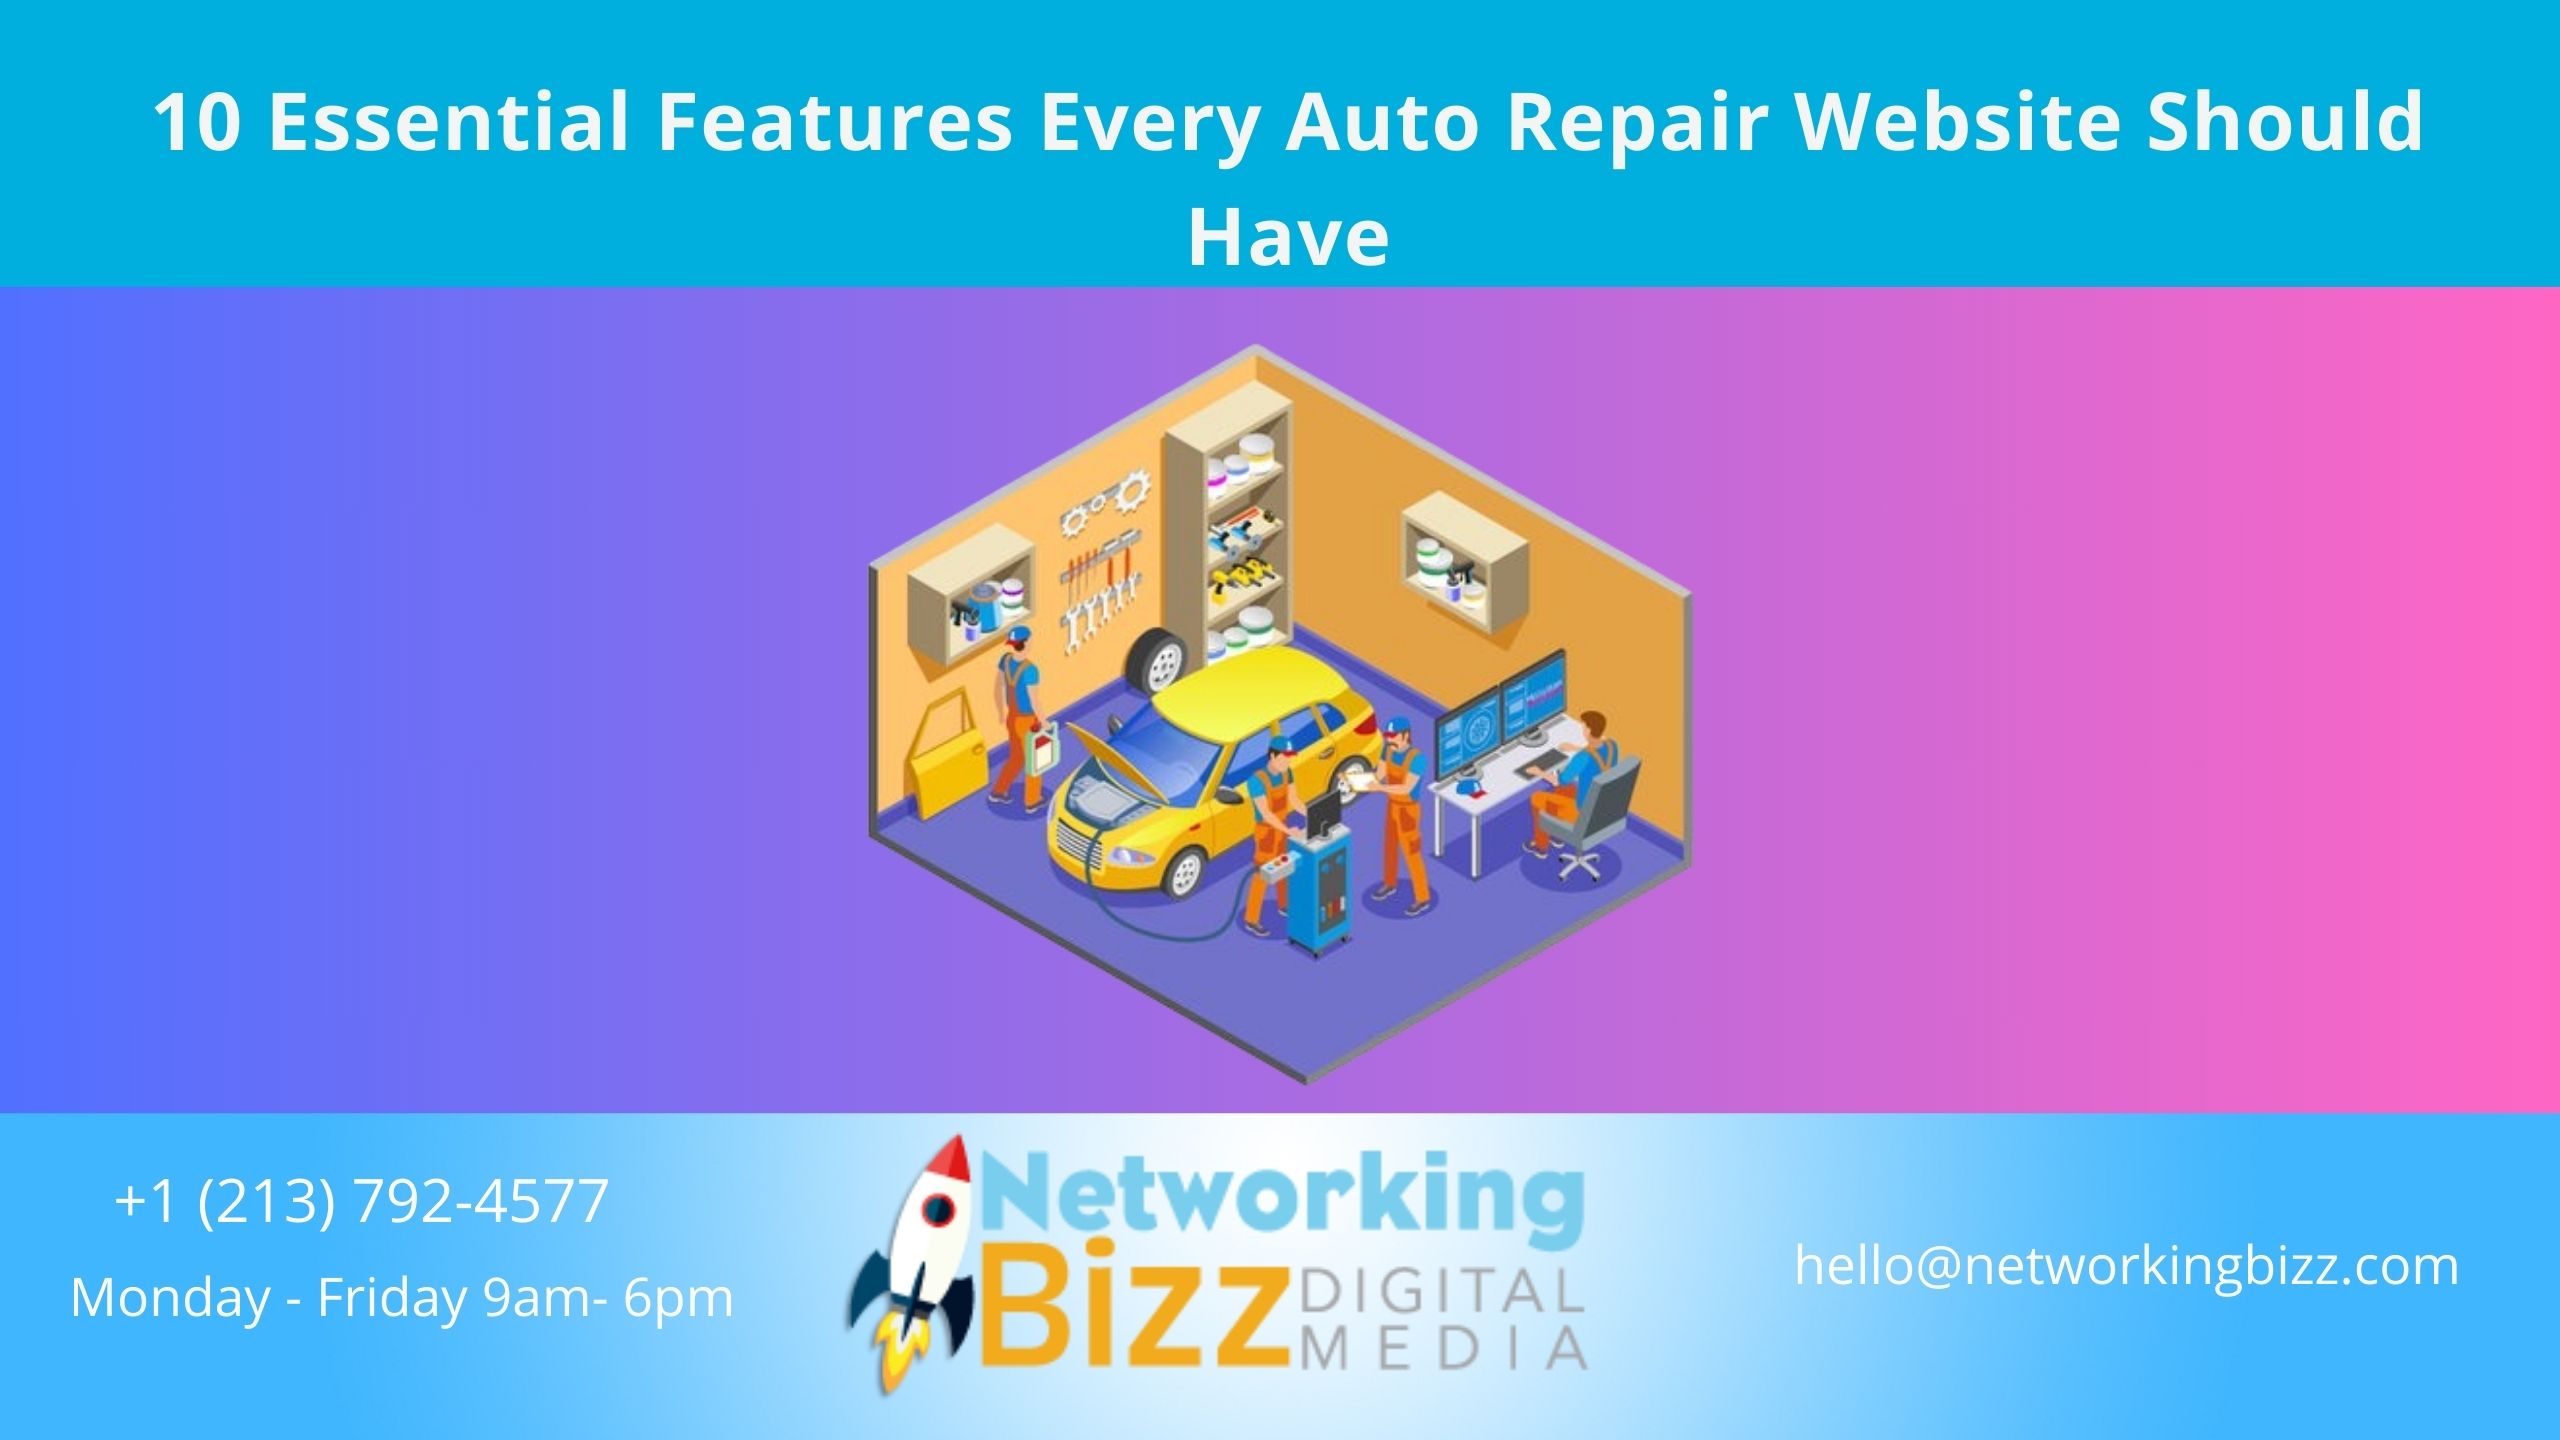 10 Essential Features Every Auto Repair Website Should Have